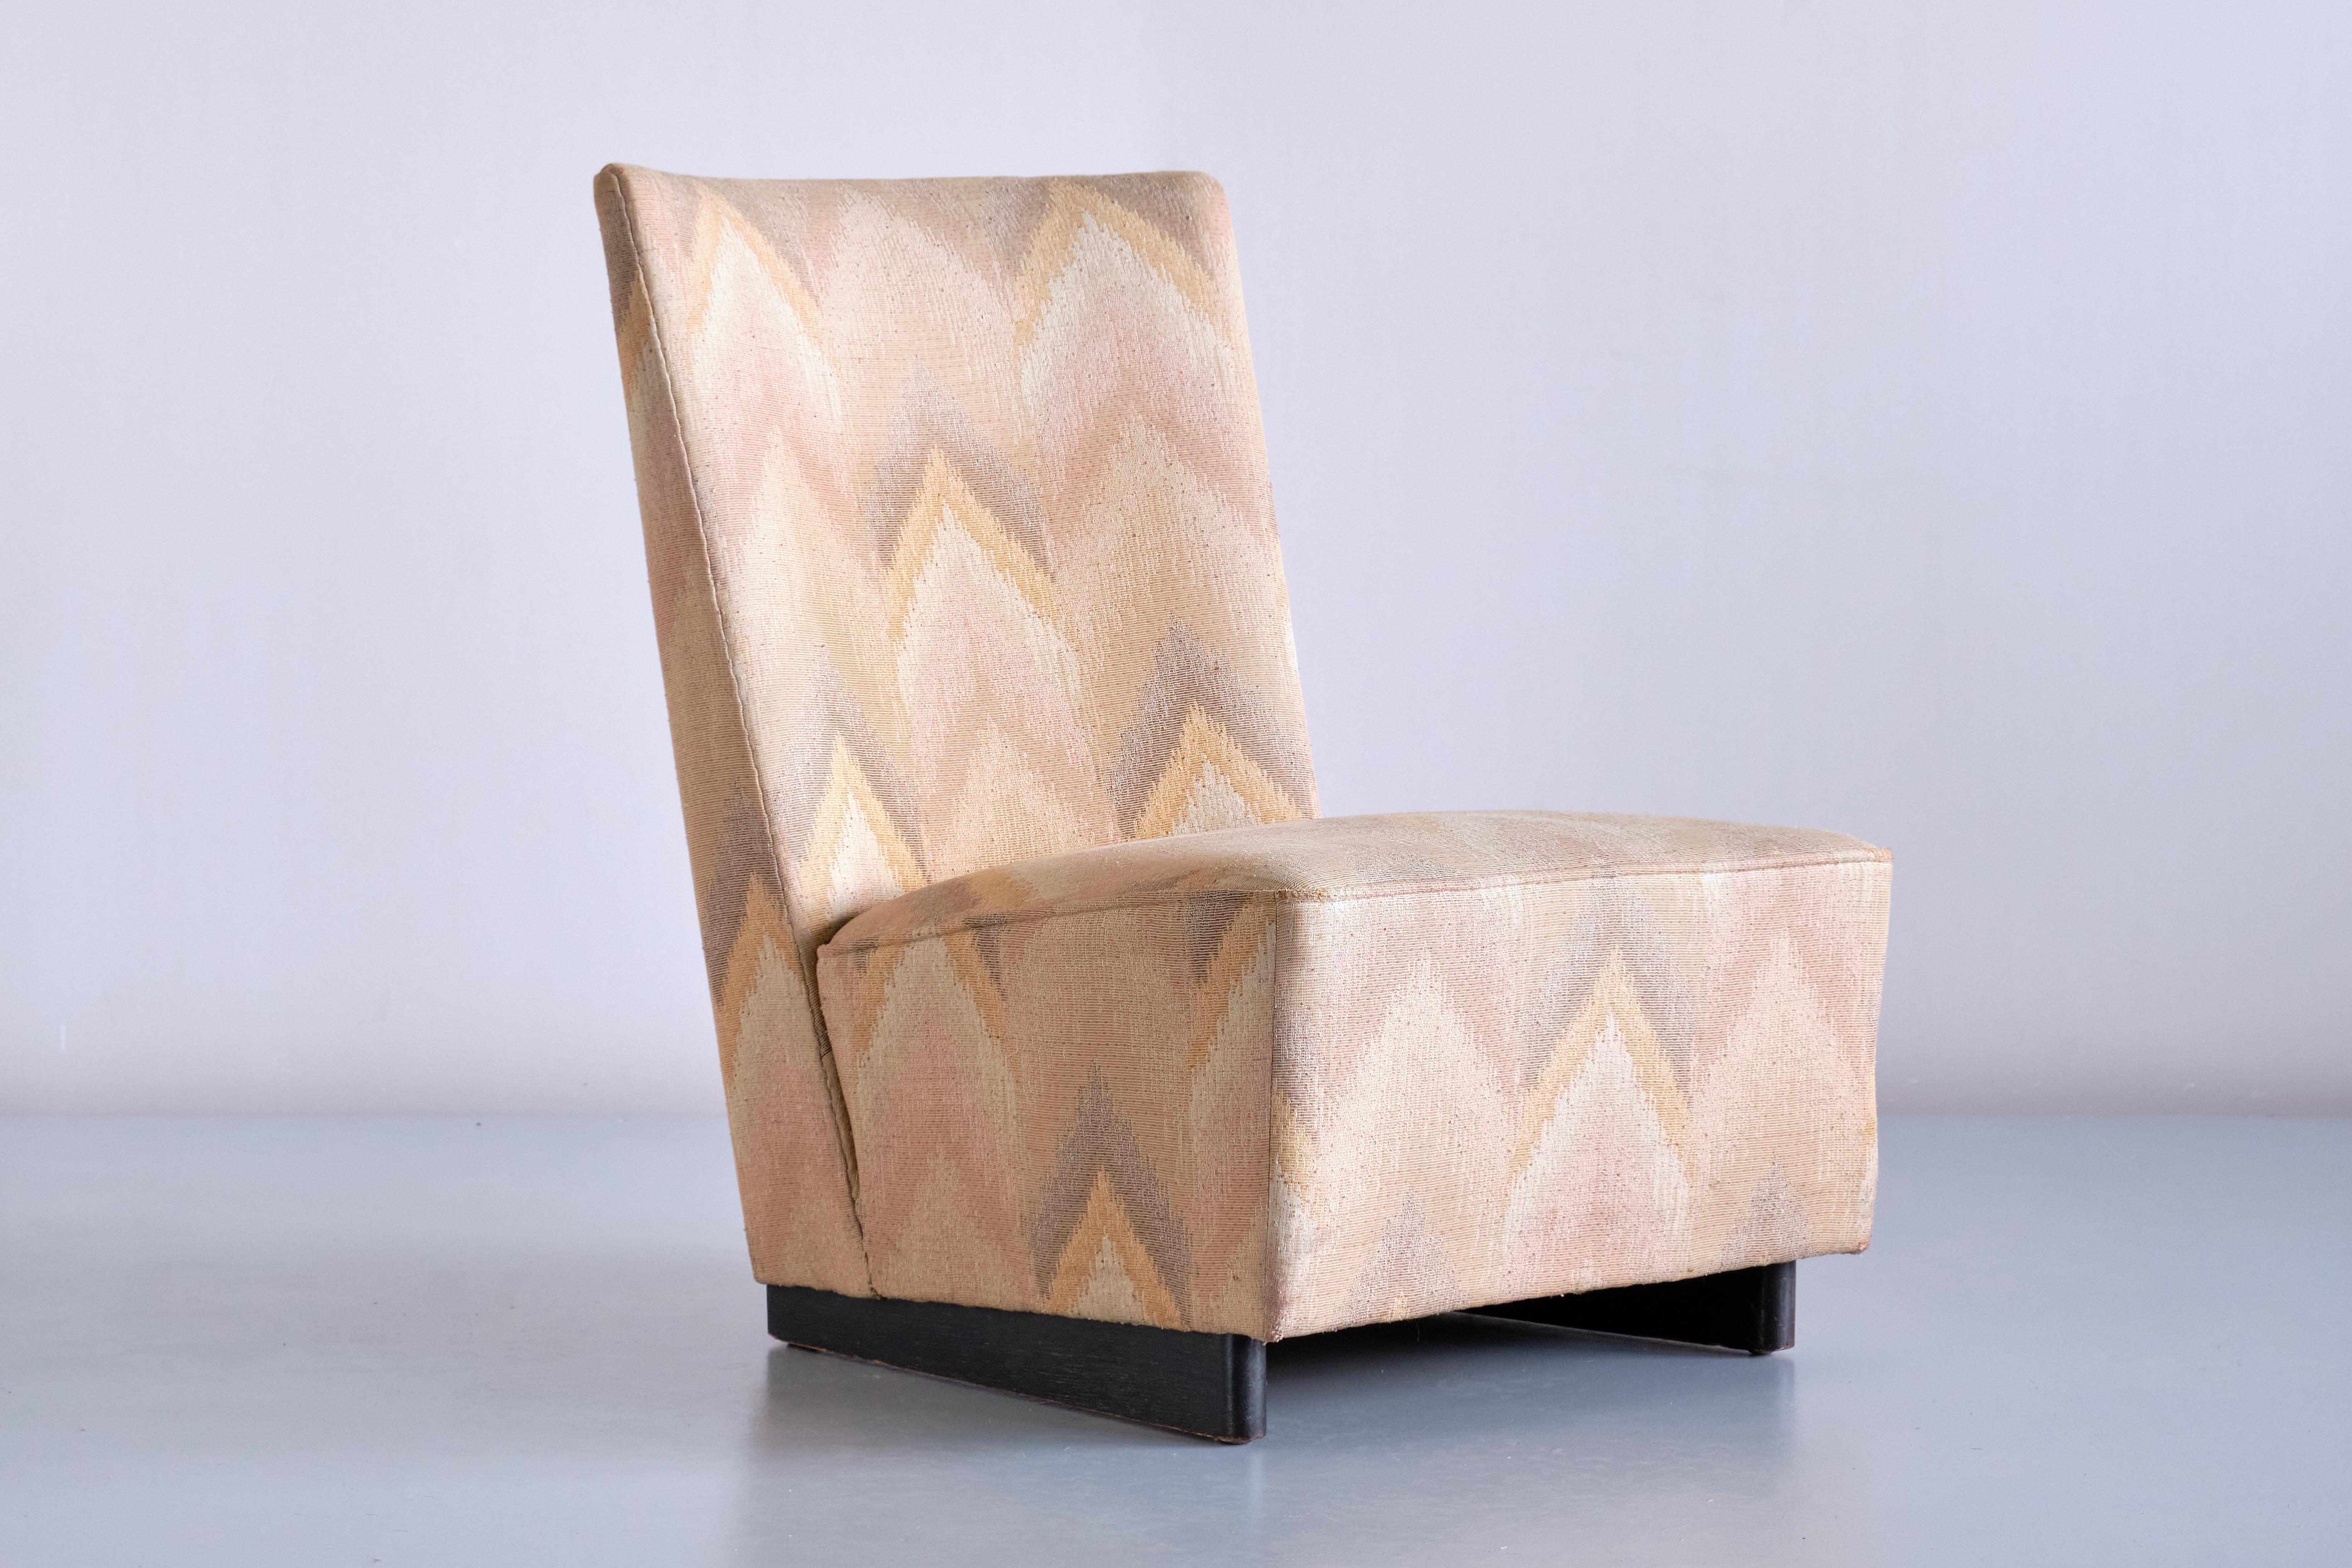 Mid-20th Century Willem Penaat Modernist Lounge Chair with Runner Legs, Metz & Co, 1935 For Sale